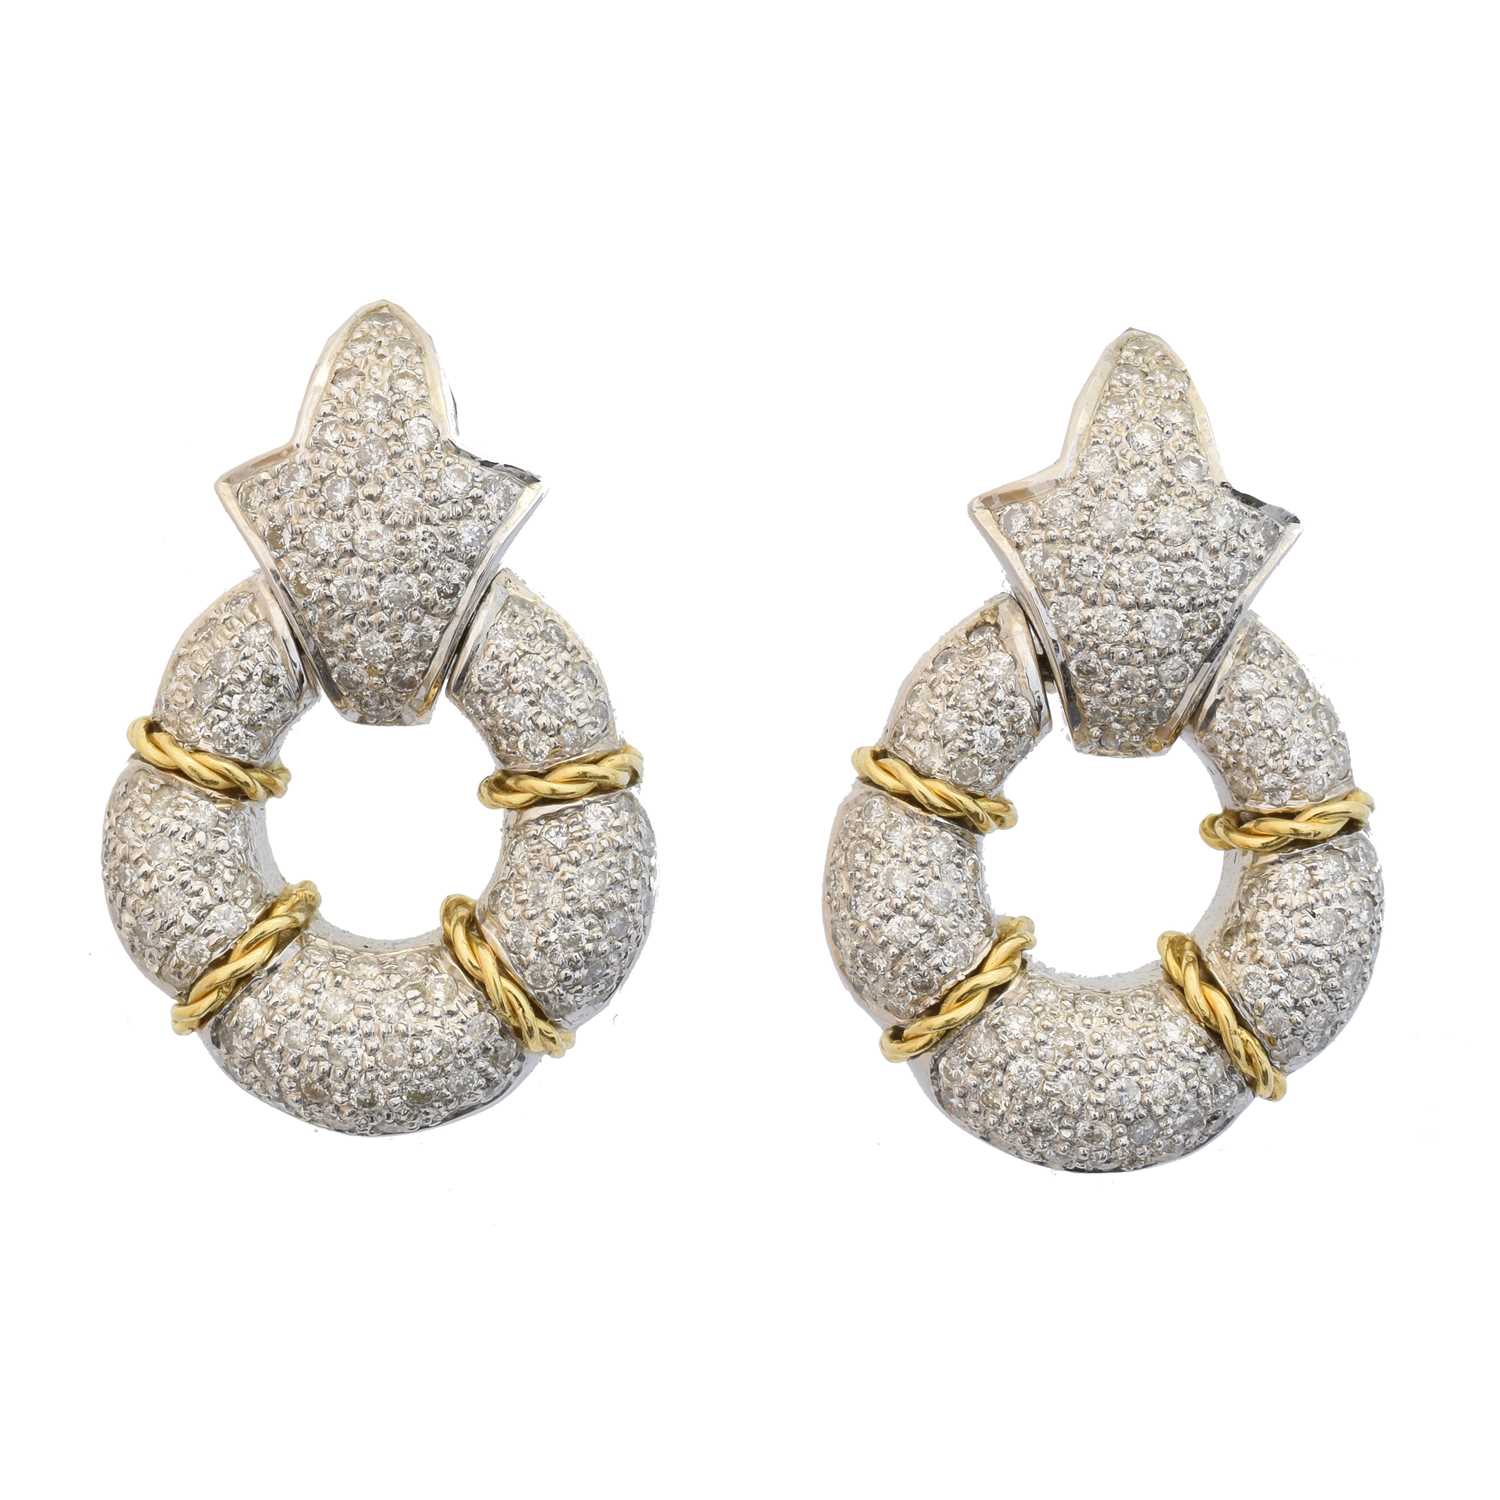 Lot 48 - A pair of 18ct gold diamond earrings